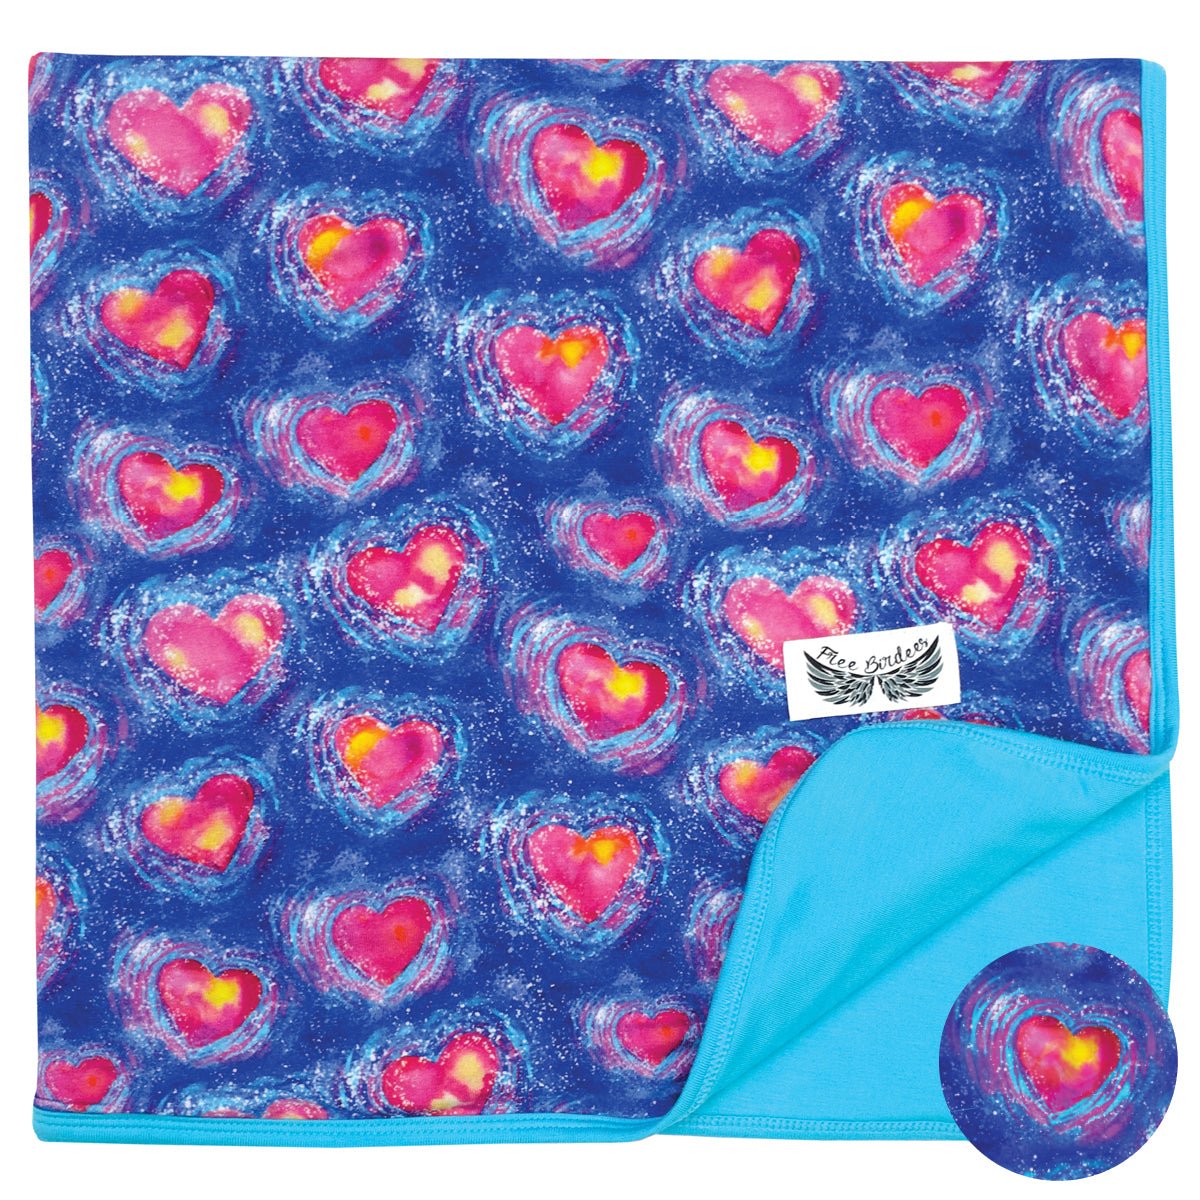 A Thousand Hearts Toddler Blanket - Free Birdees